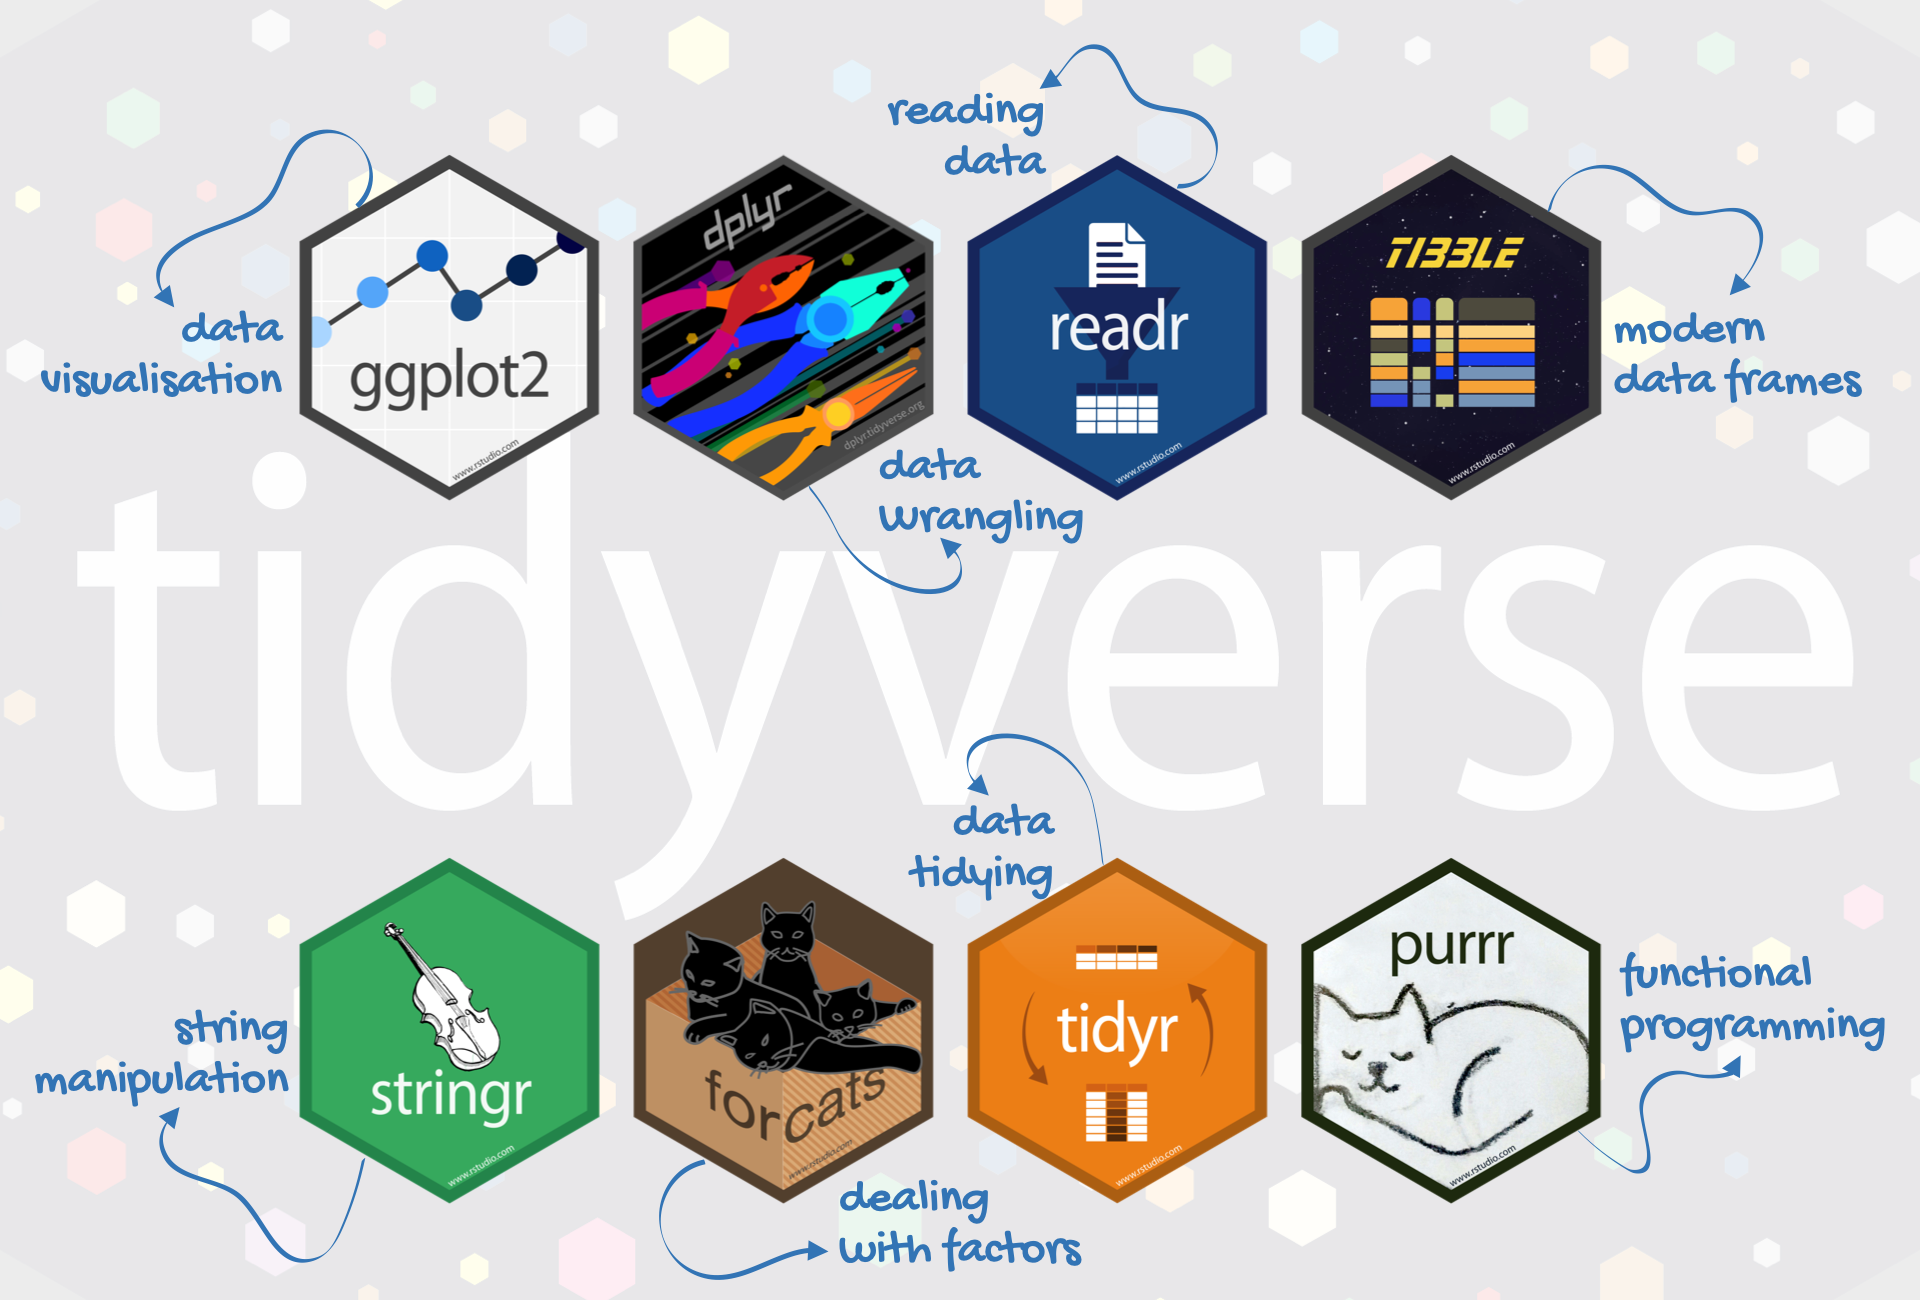 Hex logos for the eight core tidyverse packages and their primary purposes.